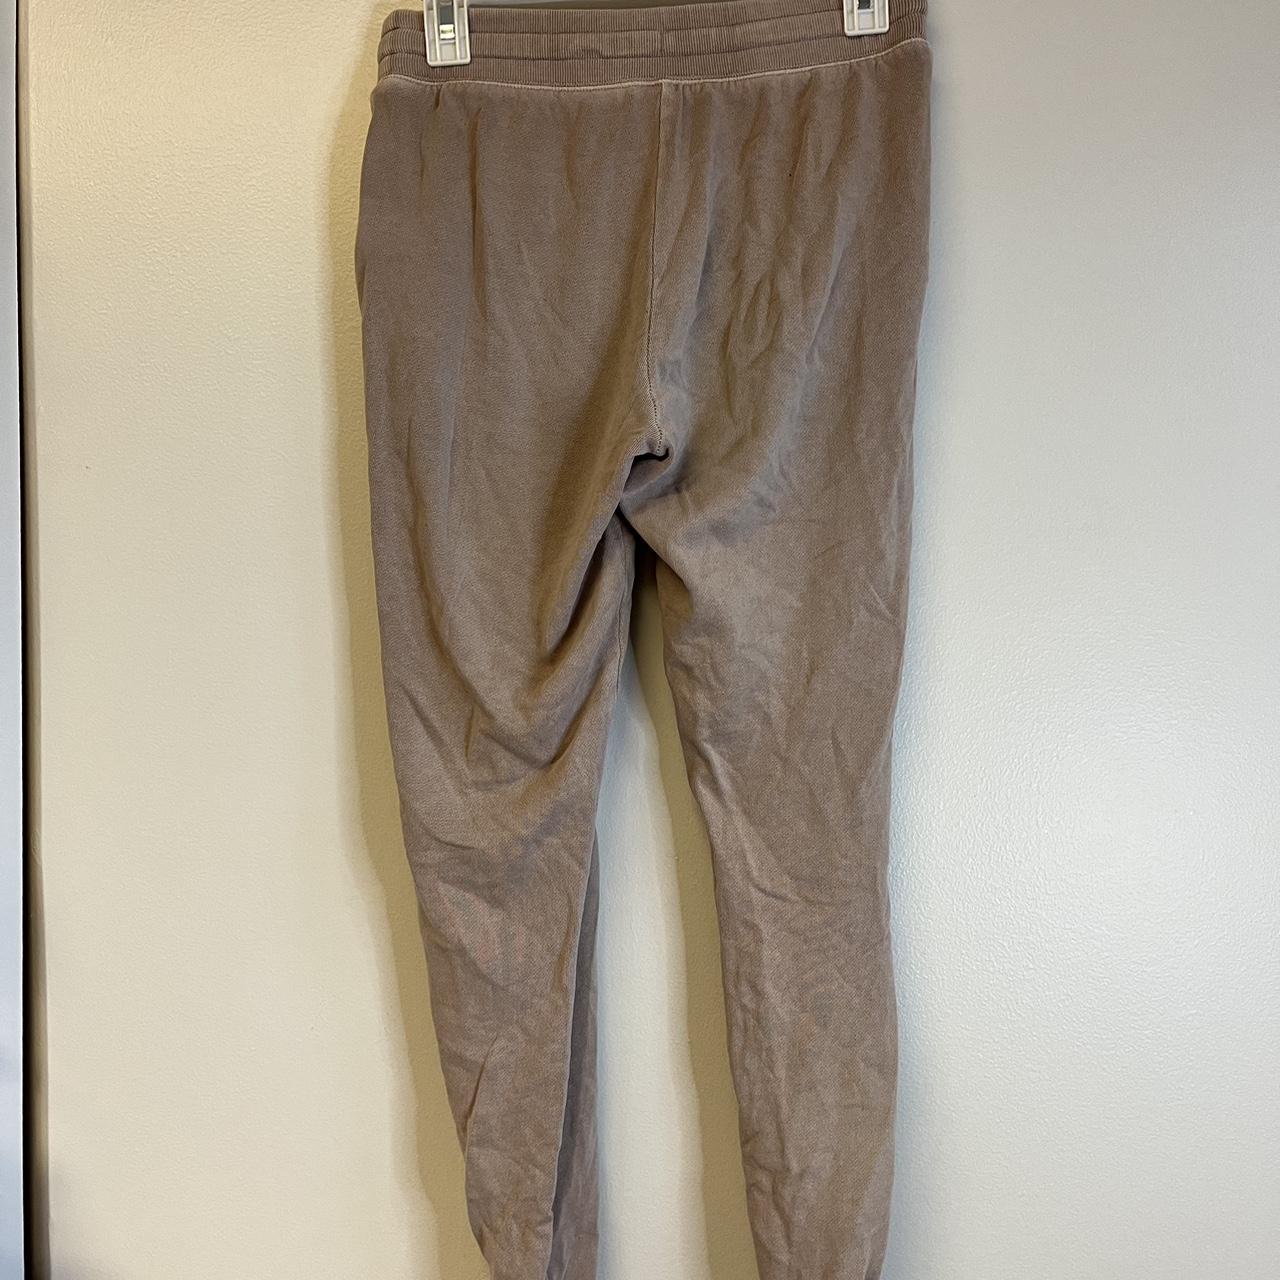 Old navy jogger sweatpants size xs but fit more like - Depop